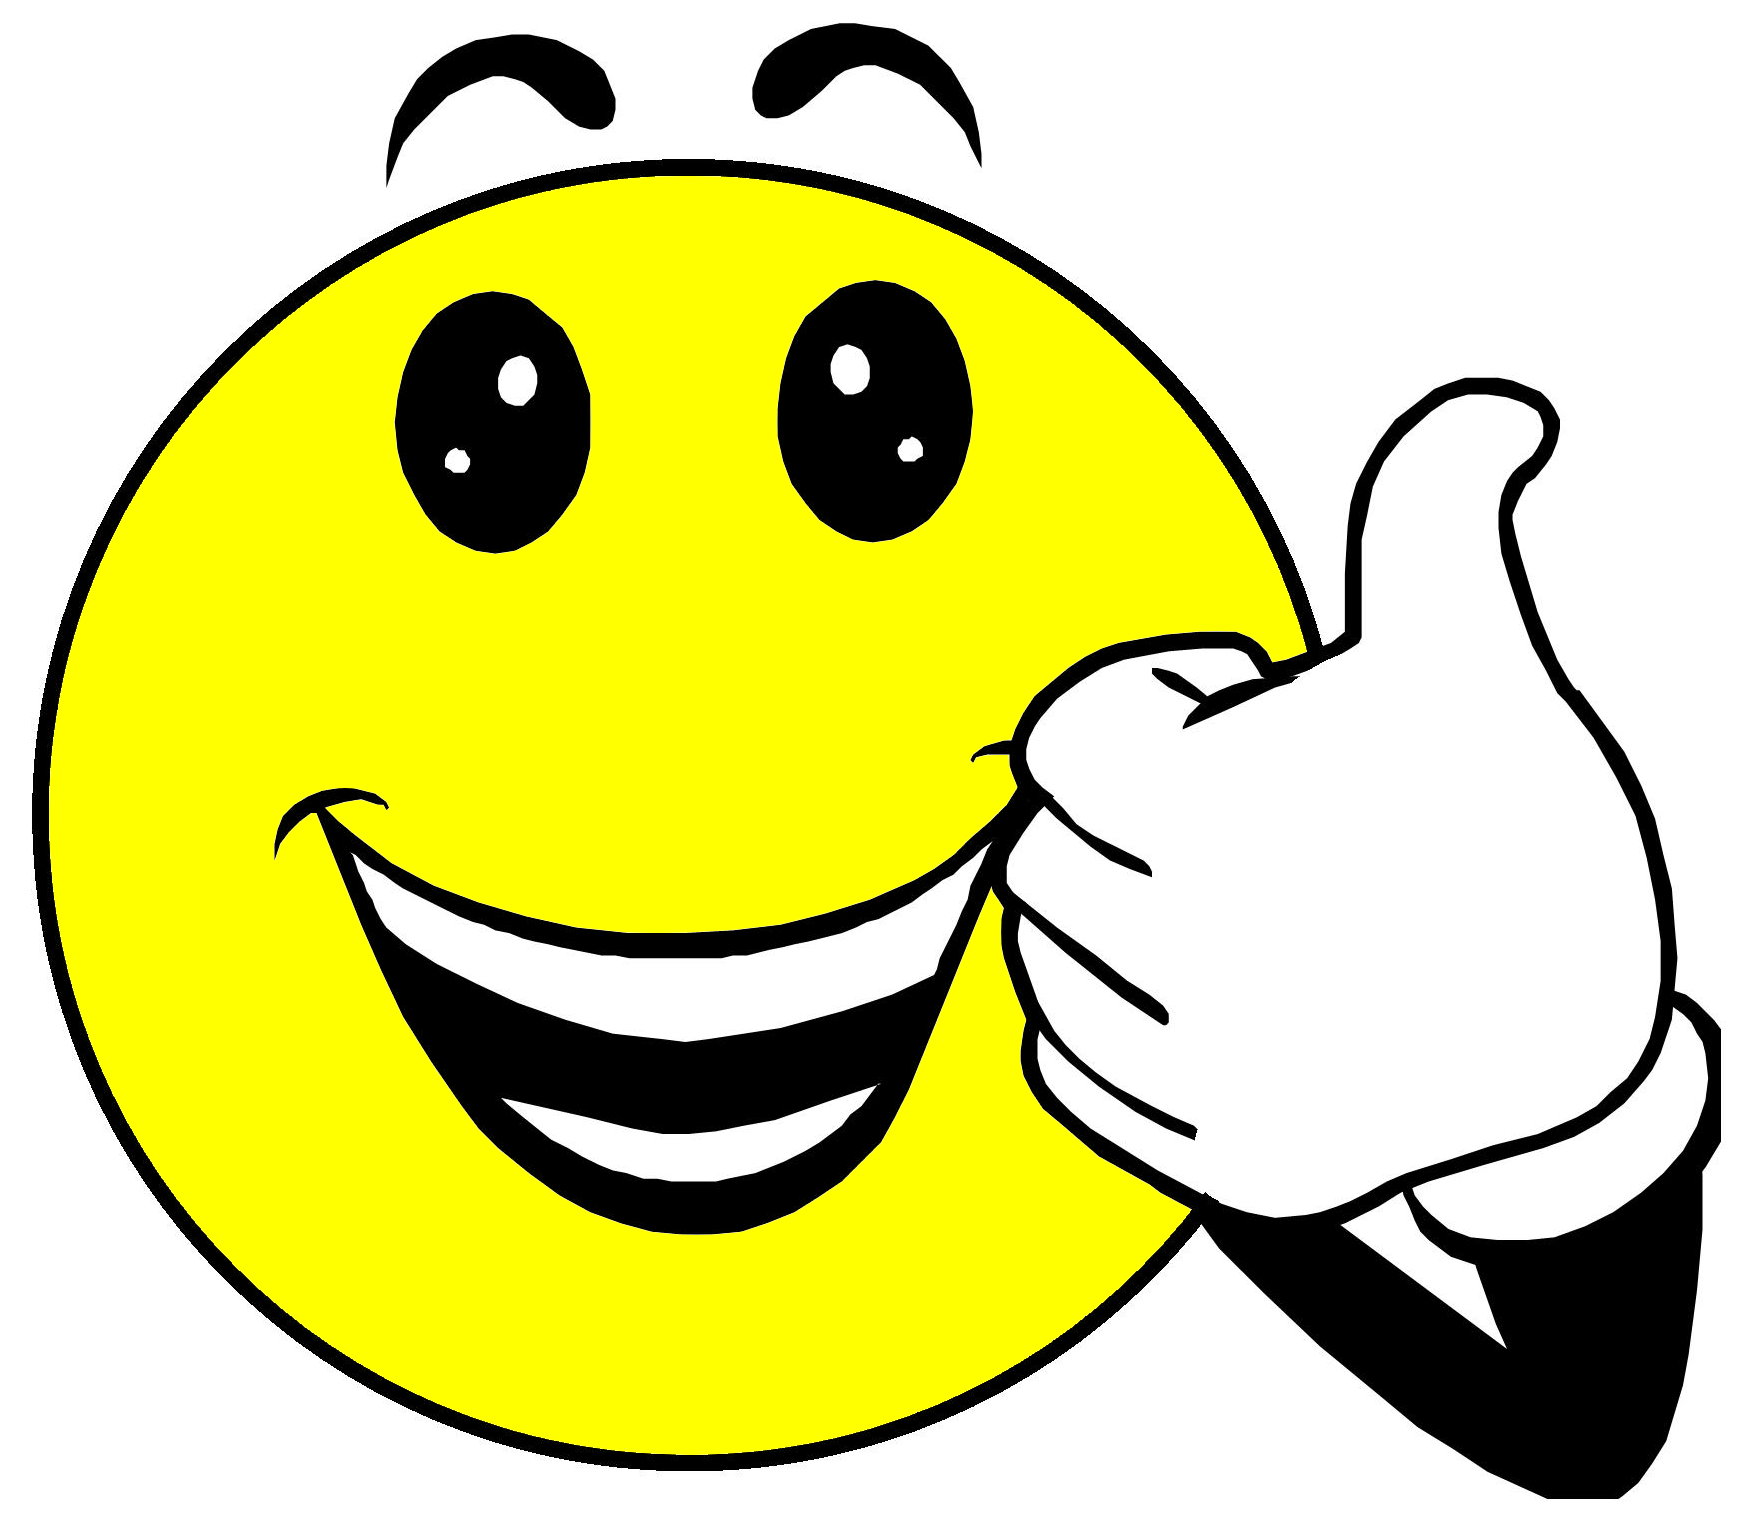 I Like It Smiley - ClipArt Best